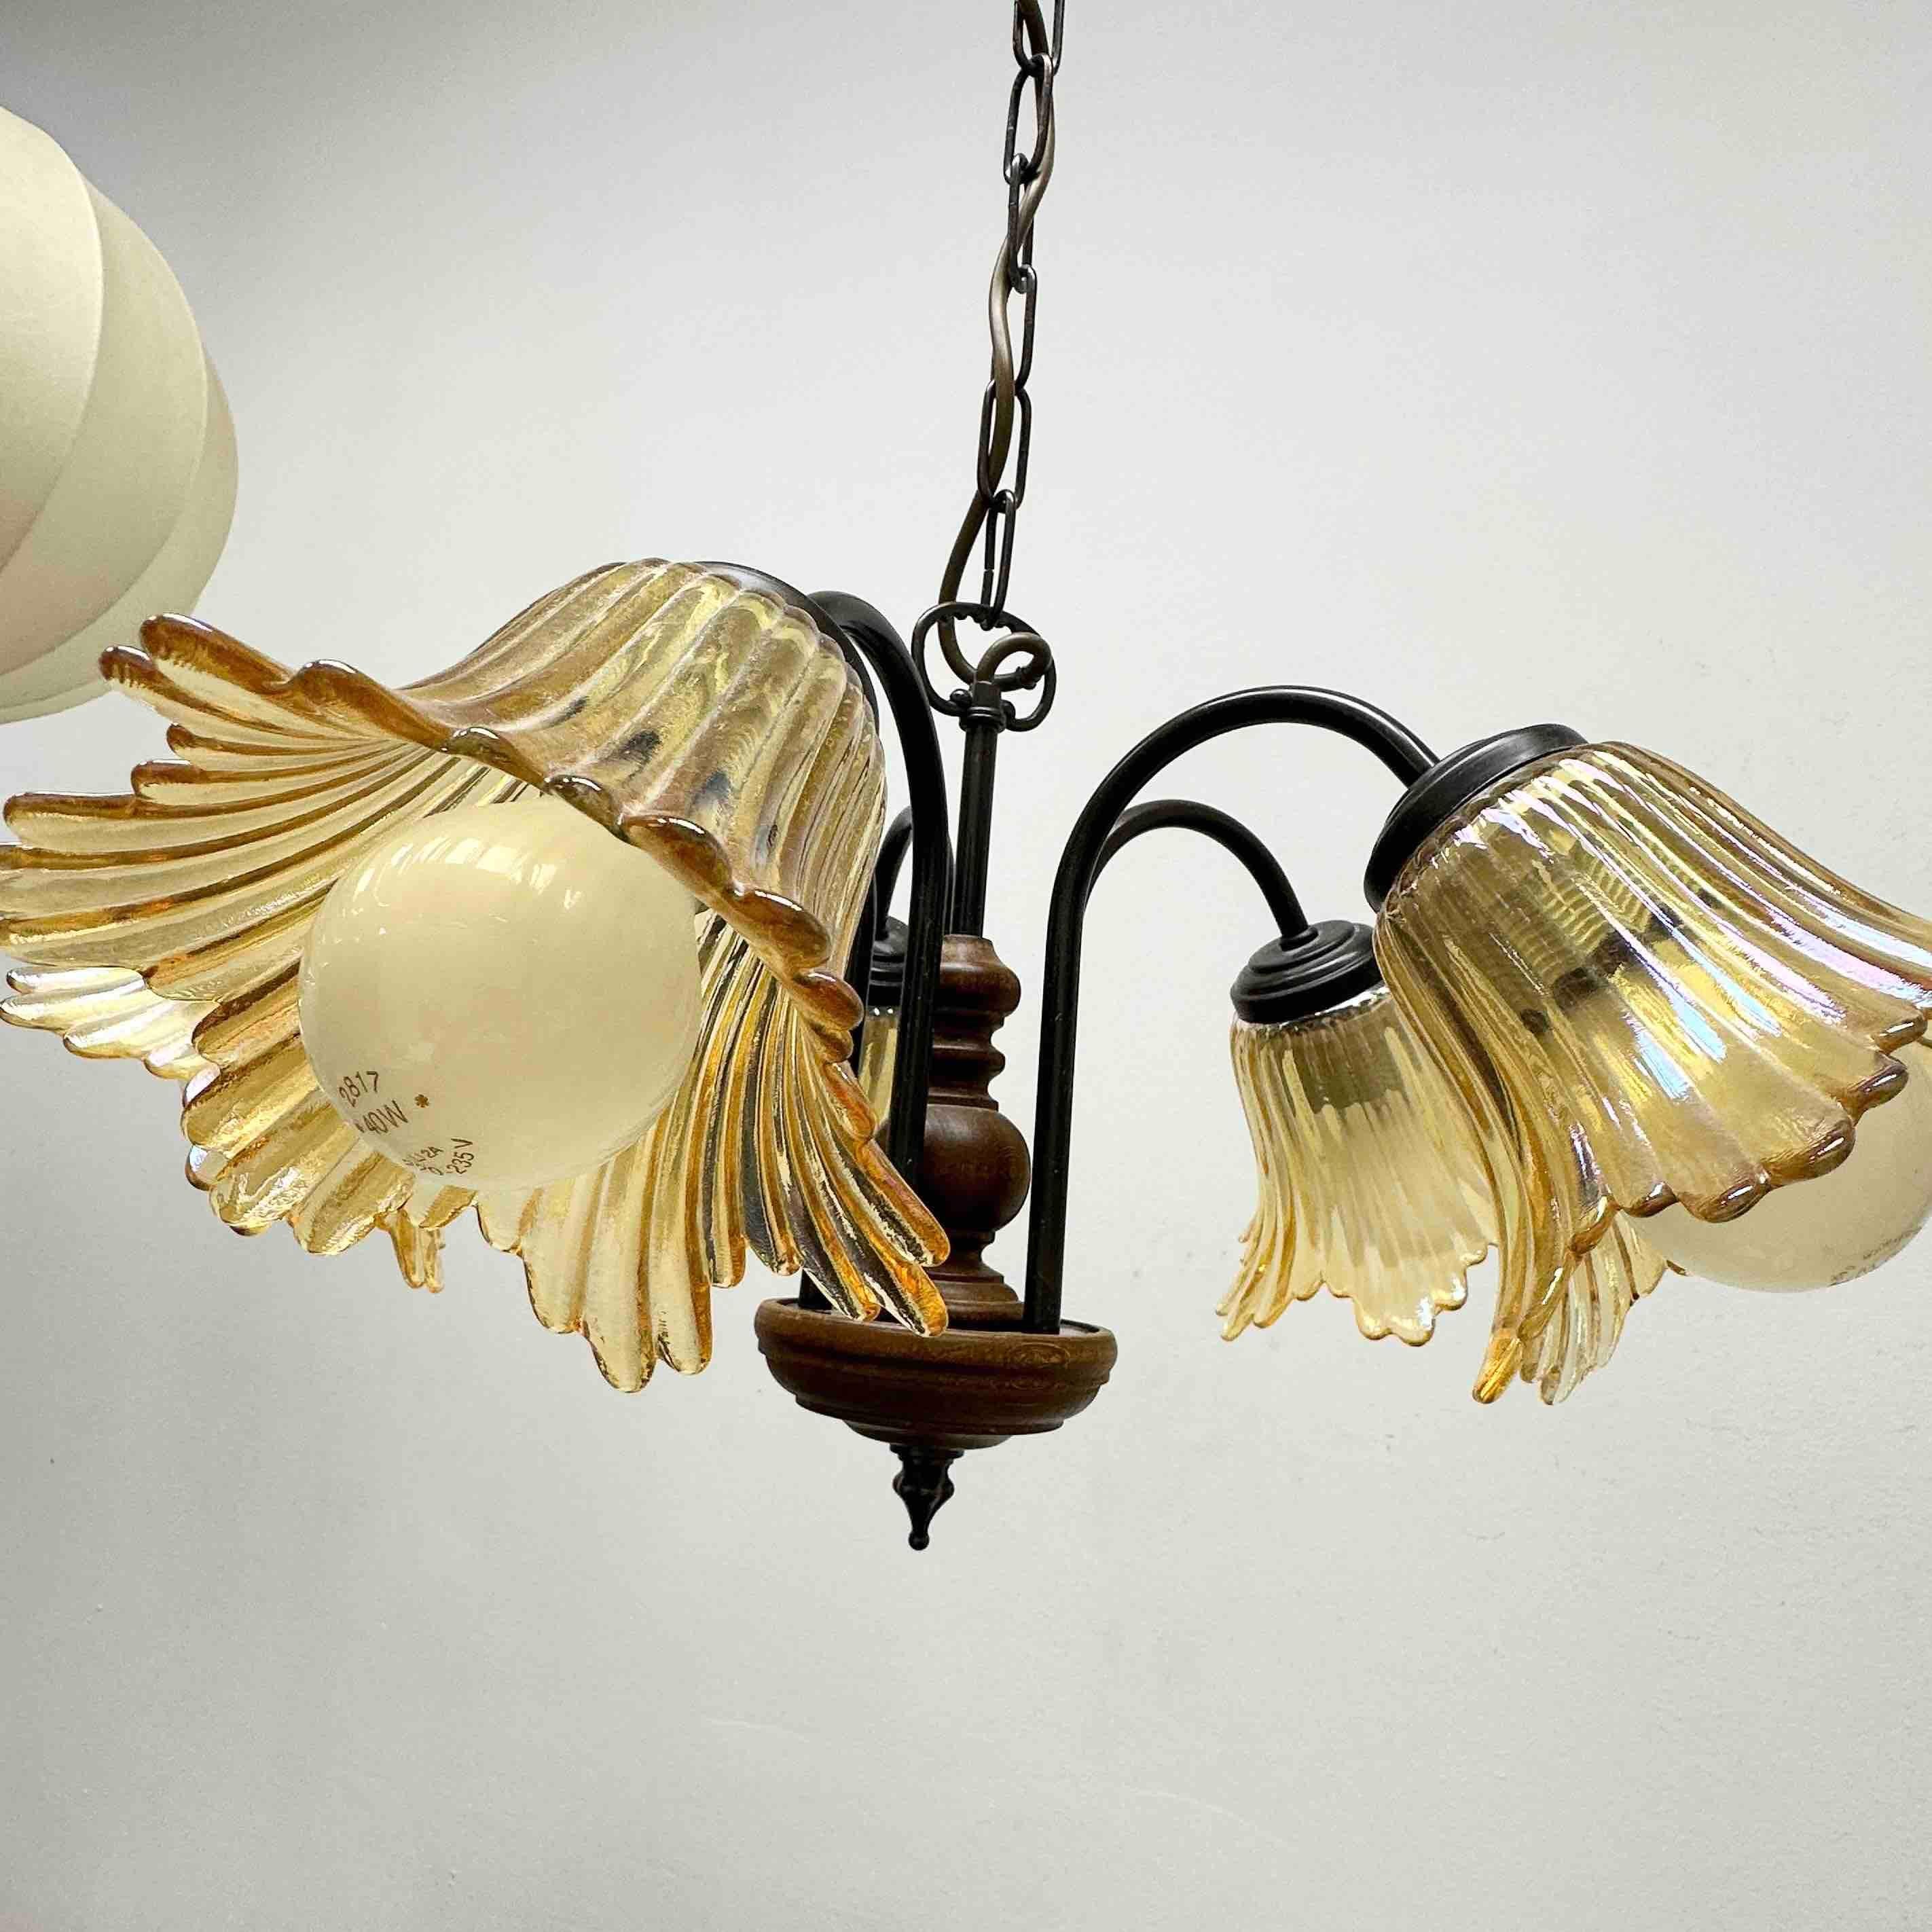 Gorgeous German Tole Wood Metal Glas Shade Five Light Chandelier, 1970s For Sale 5